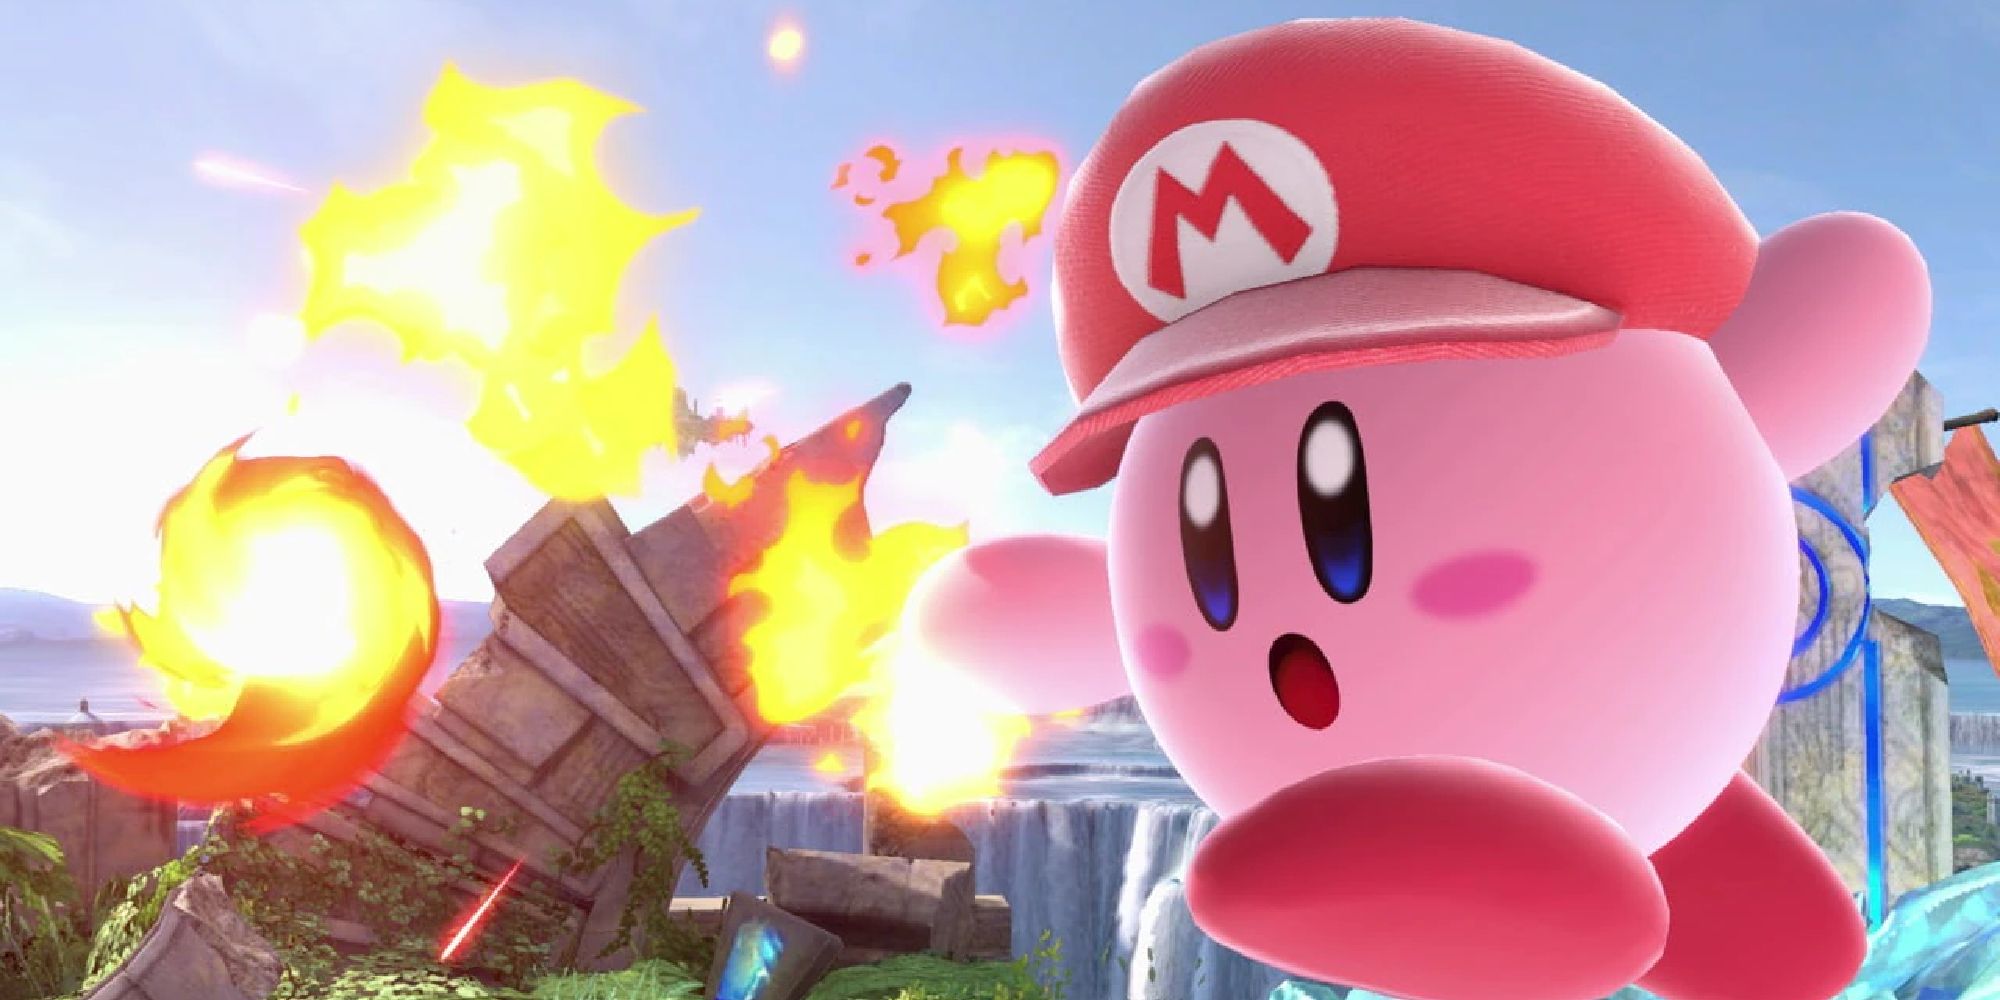 Kirby wearing Mario's hat and throwing fireballs